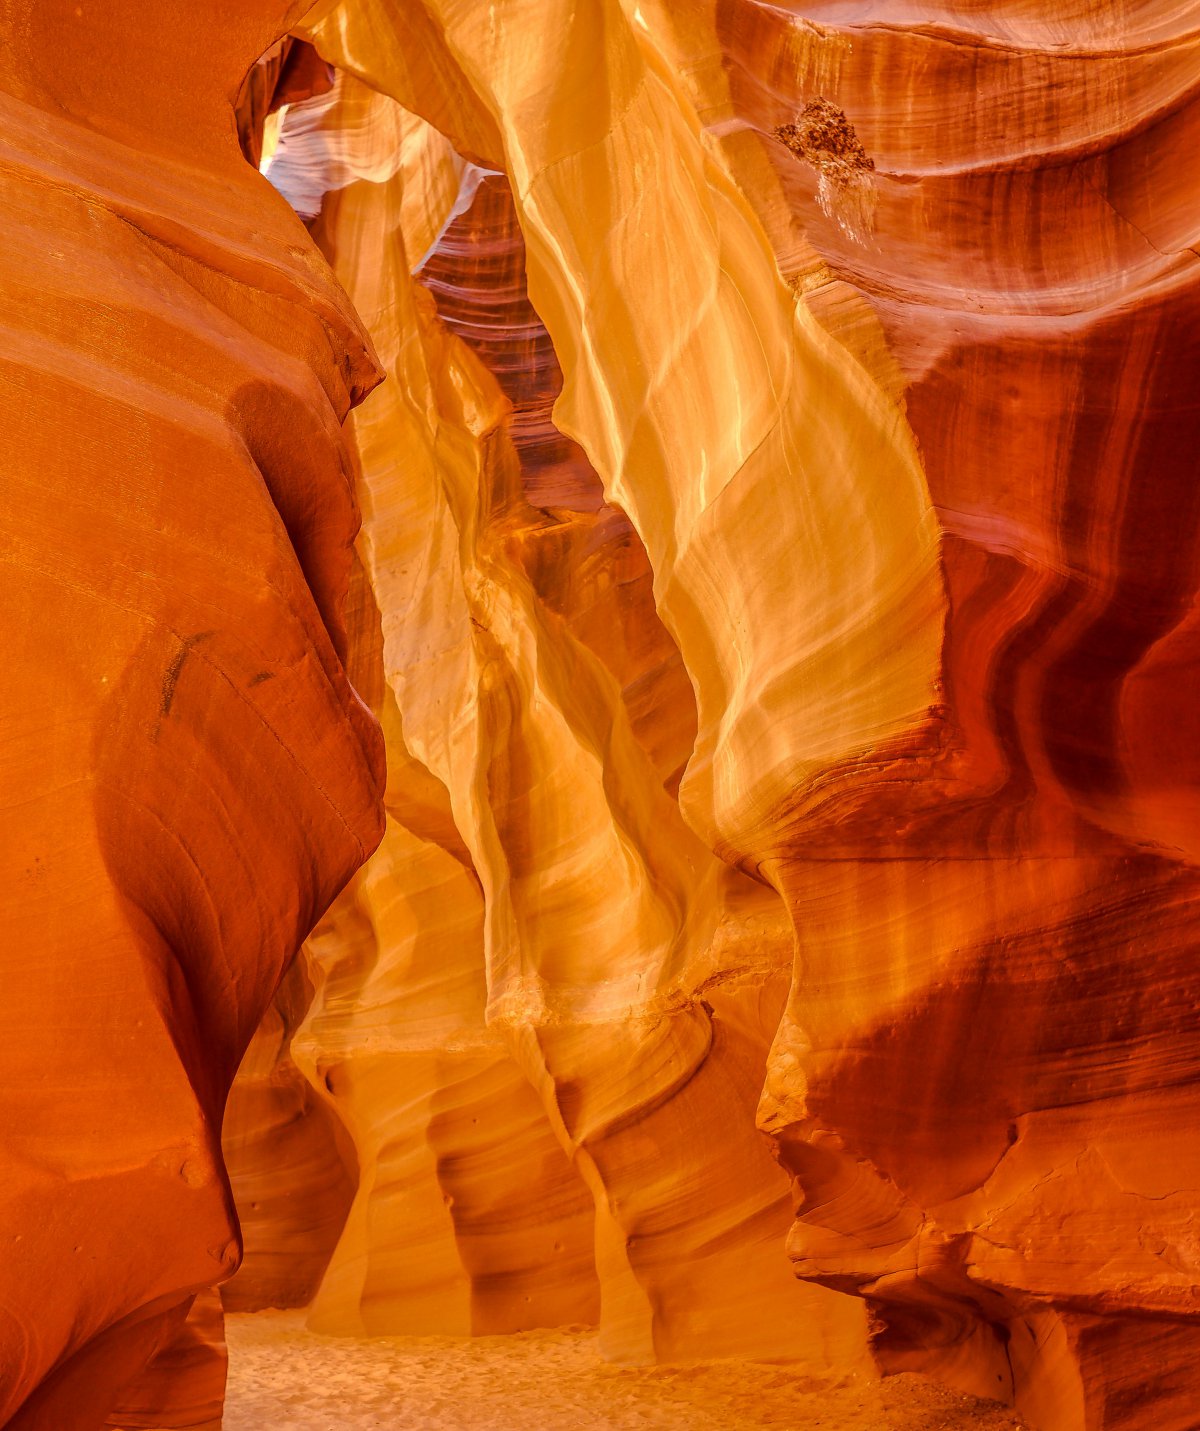 Antelope Canyon Landscape Pictures